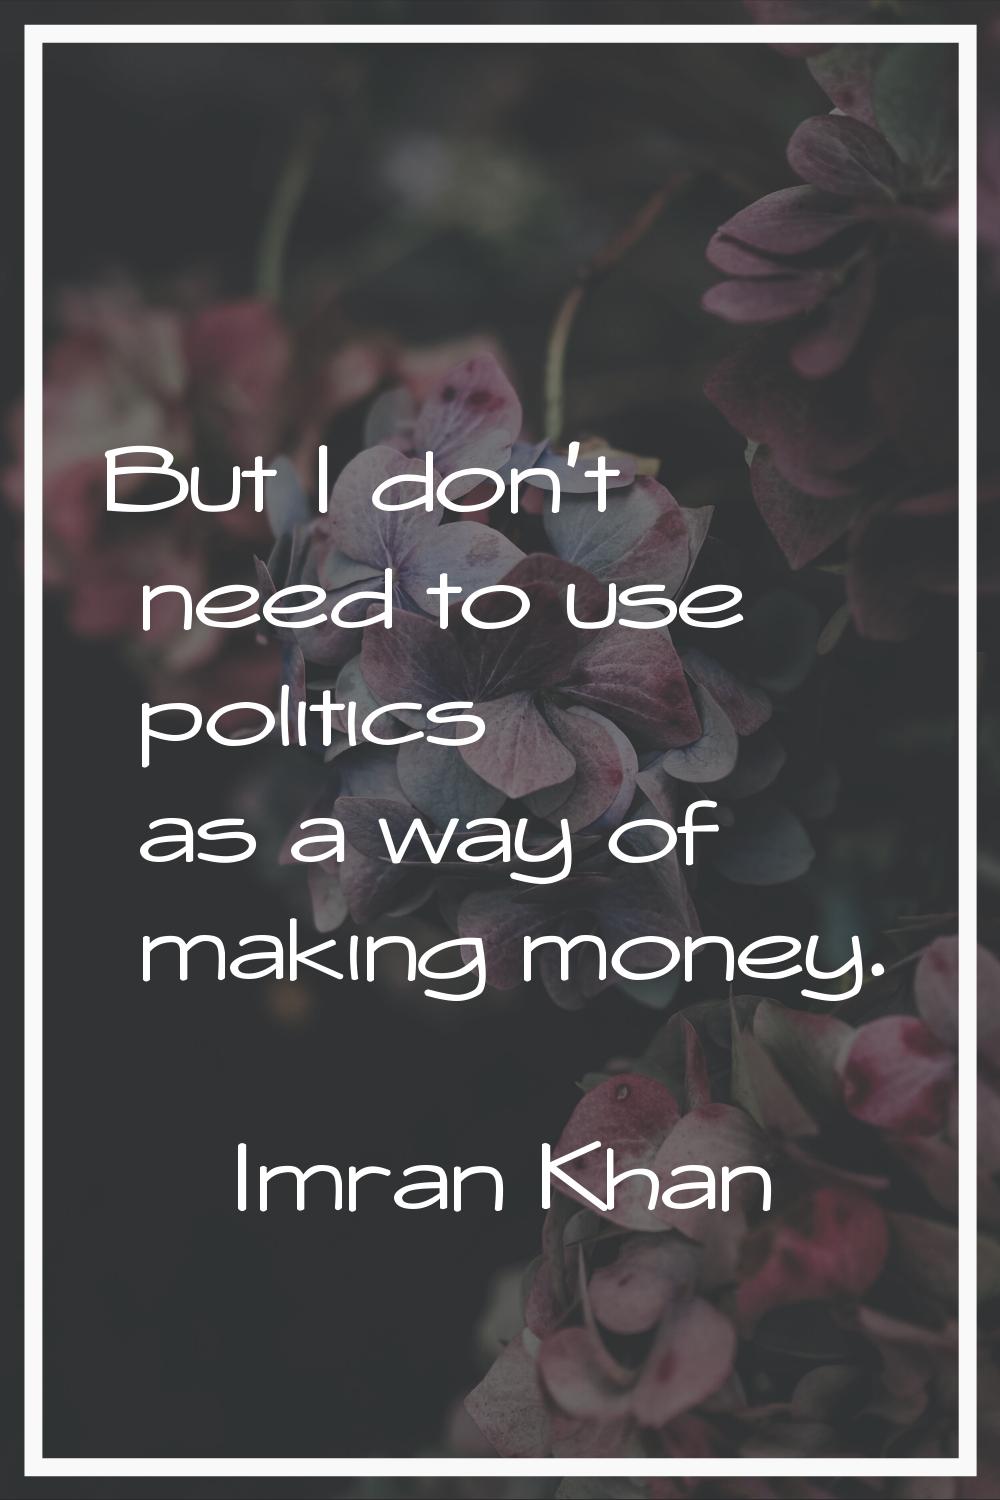 But I don't need to use politics as a way of making money.